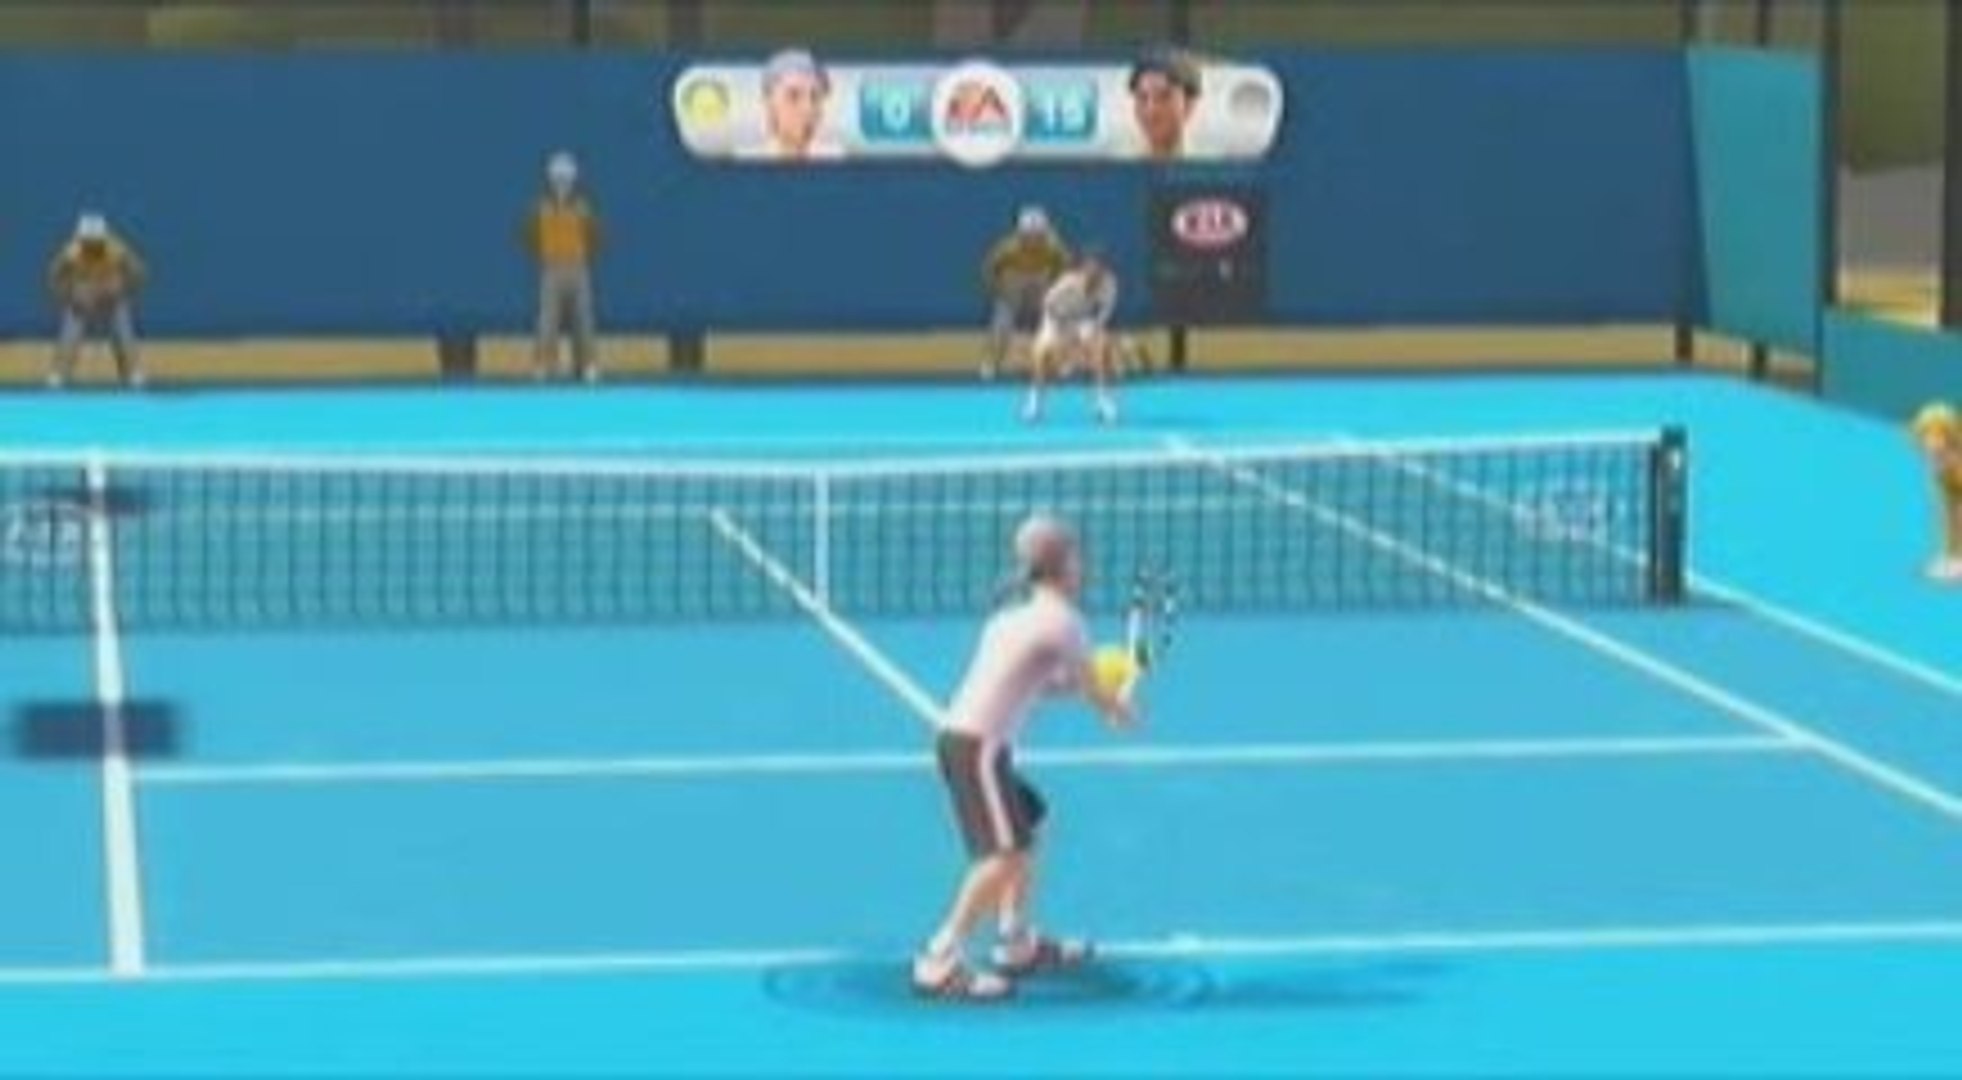 Grand Slam Tennis Wii Motion Plus Gameplay Video Part1 - video Dailymotion